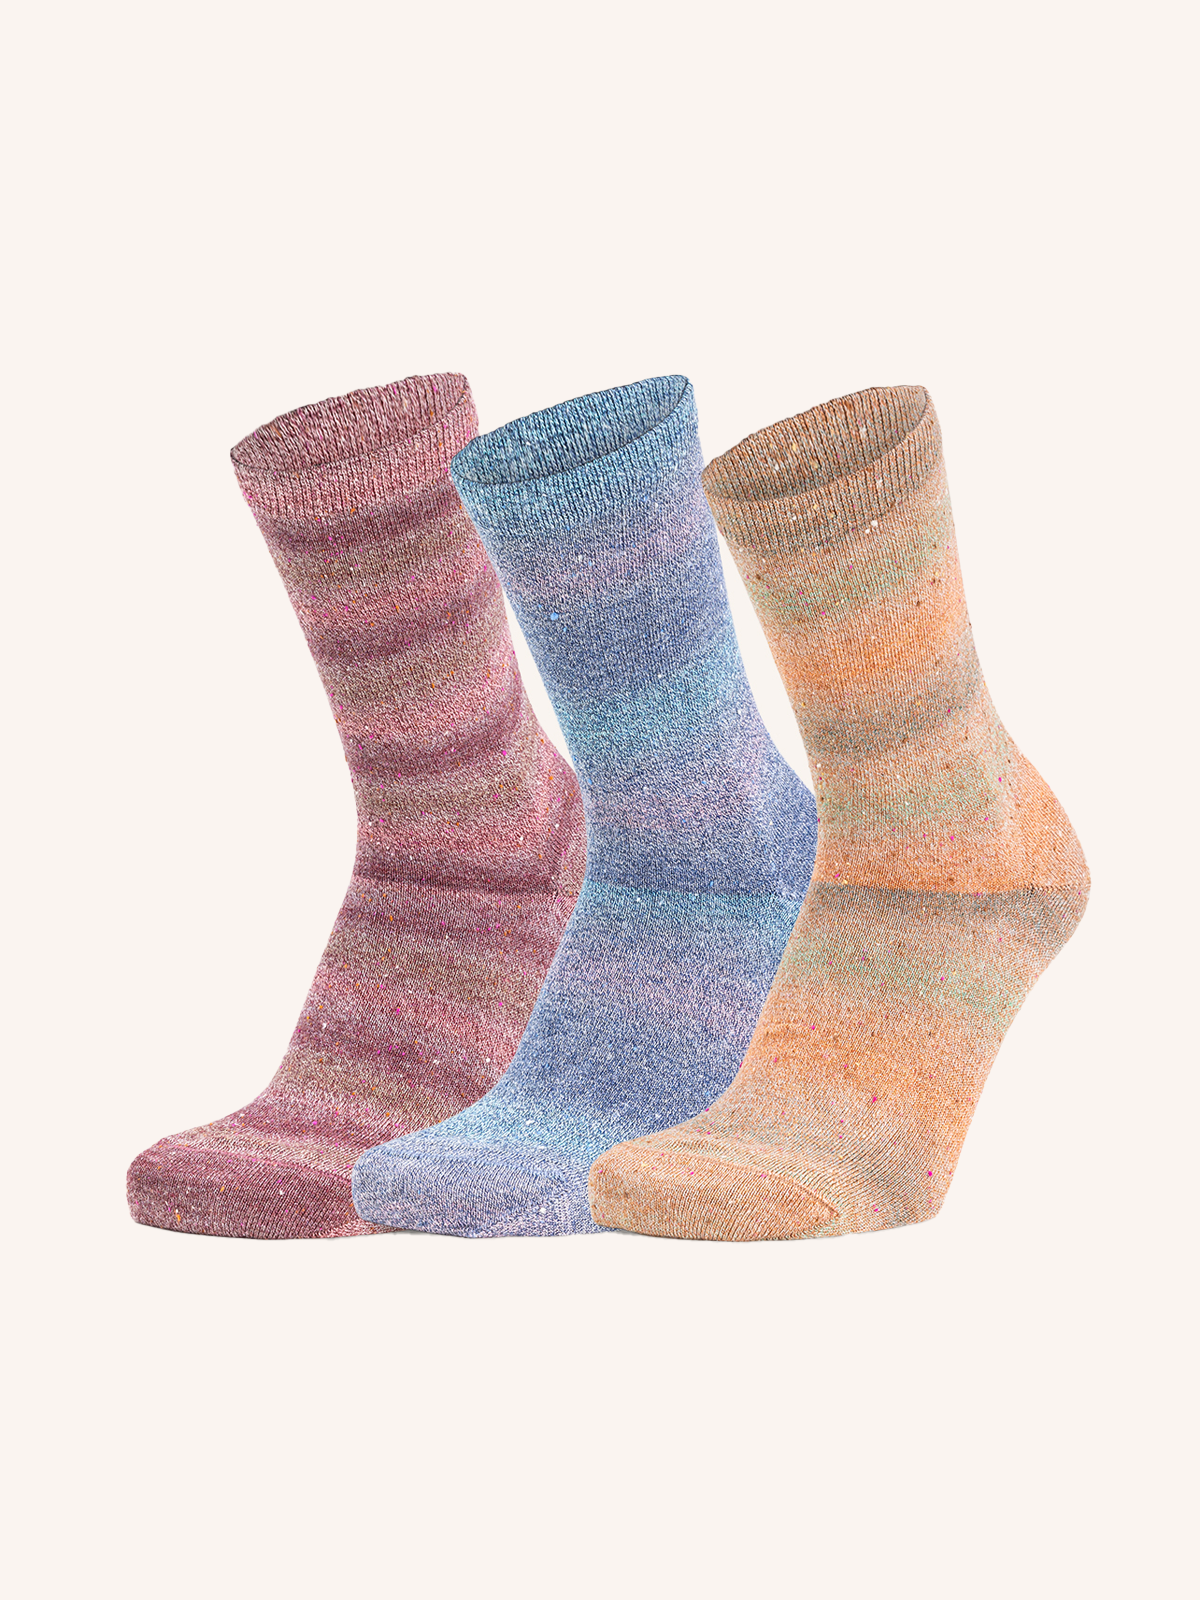 Short socks in Viscose and Cotton blend for Women | Fantasy | Pack of 3 pairs | Tweed